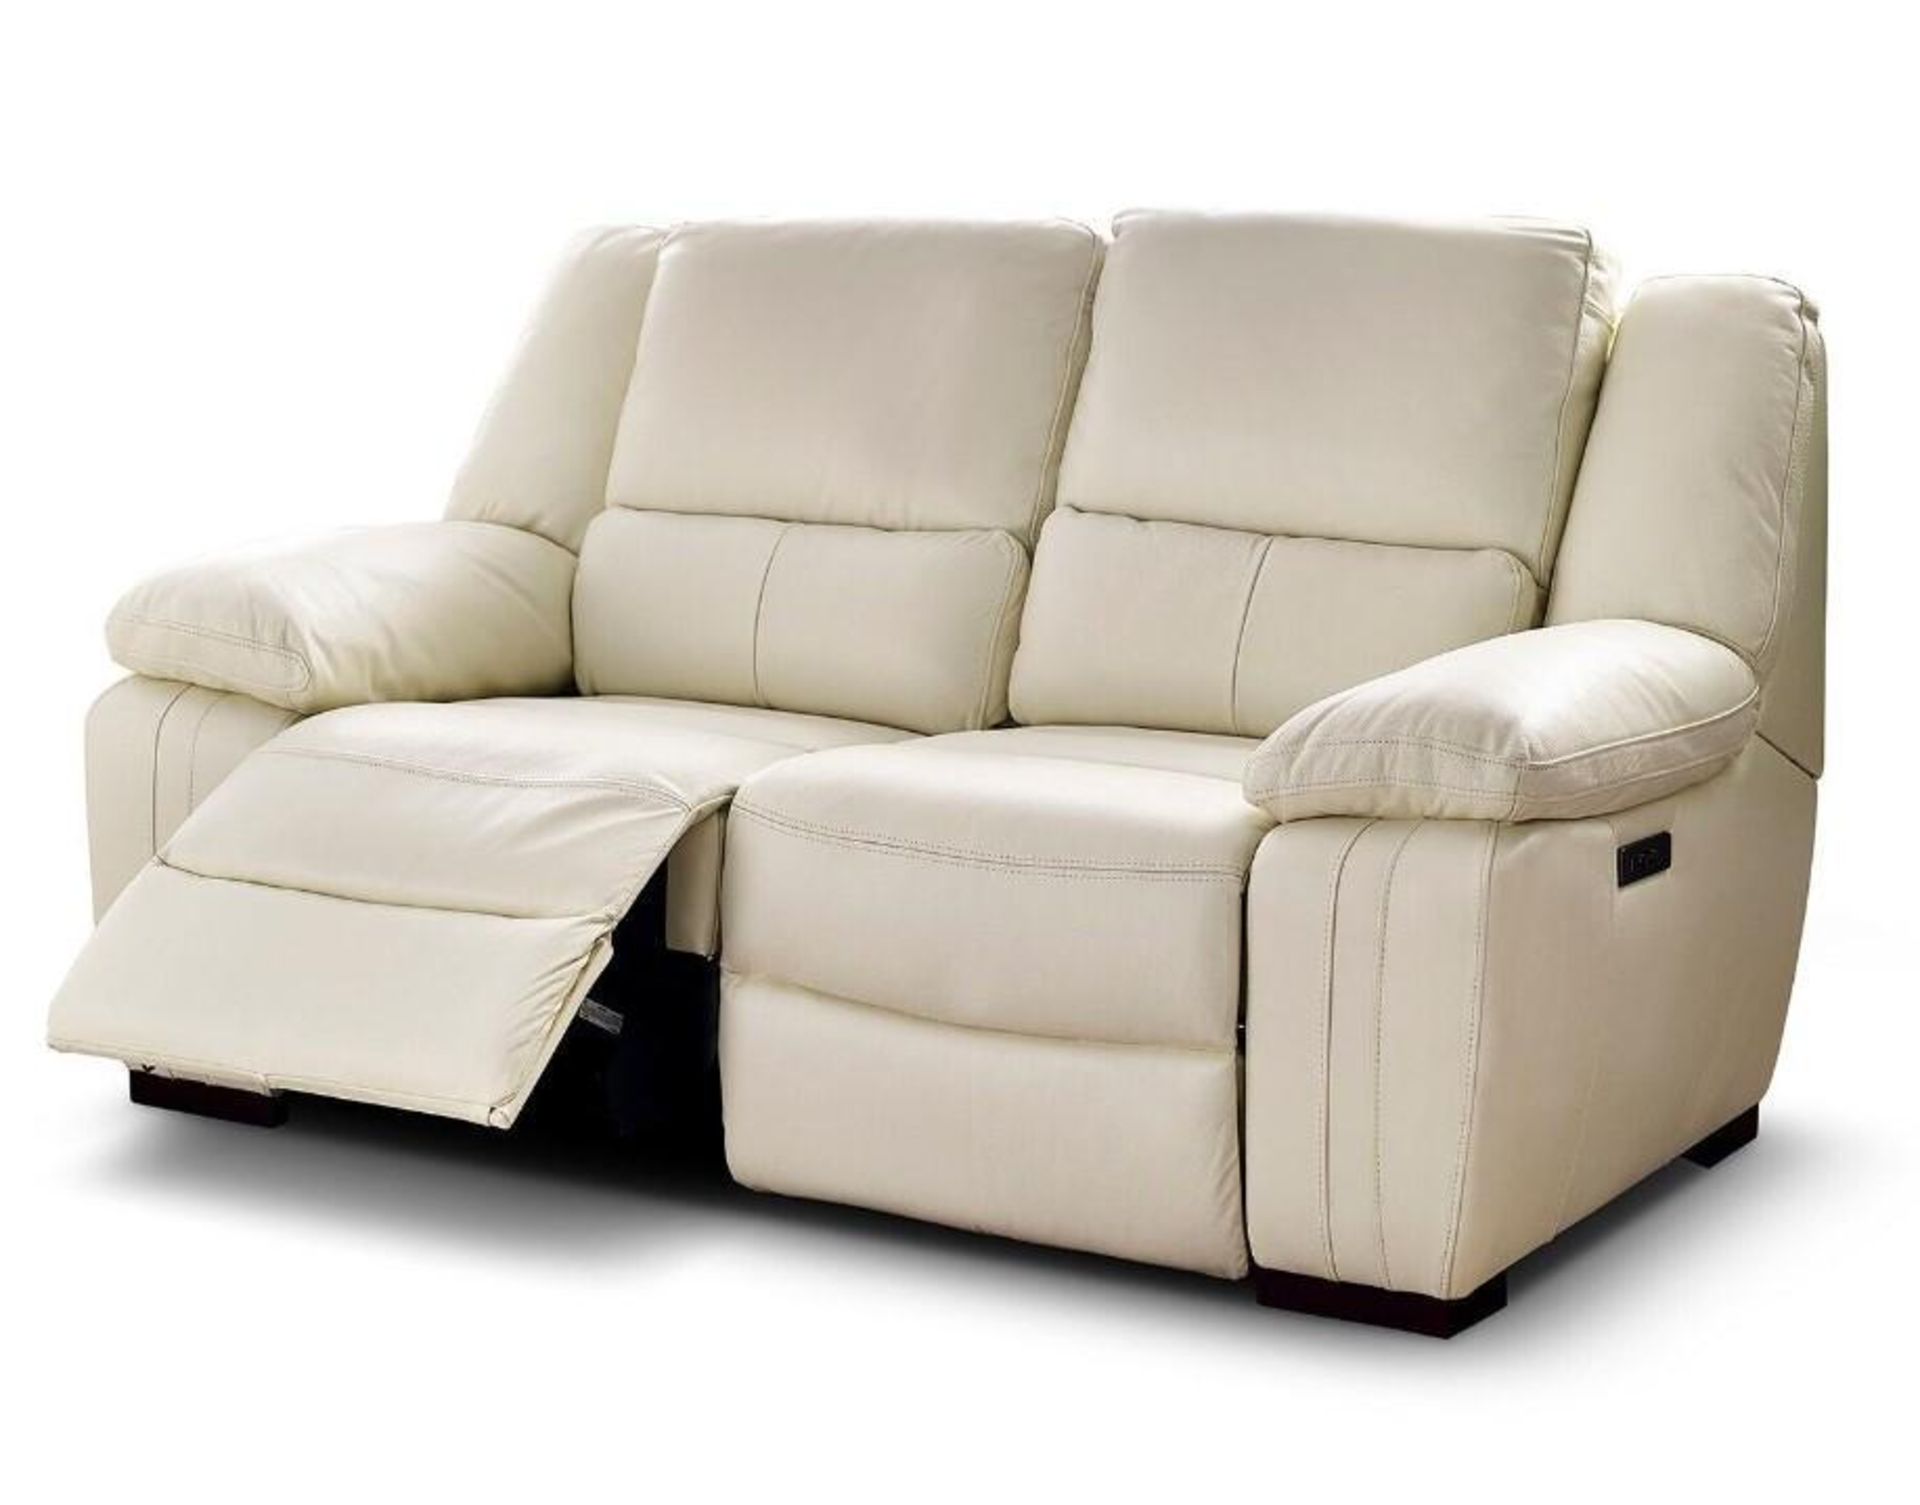 Brand new and boxed SCS Fallon 2 seater electric reclining sofa in Cream. - Bild 2 aus 7